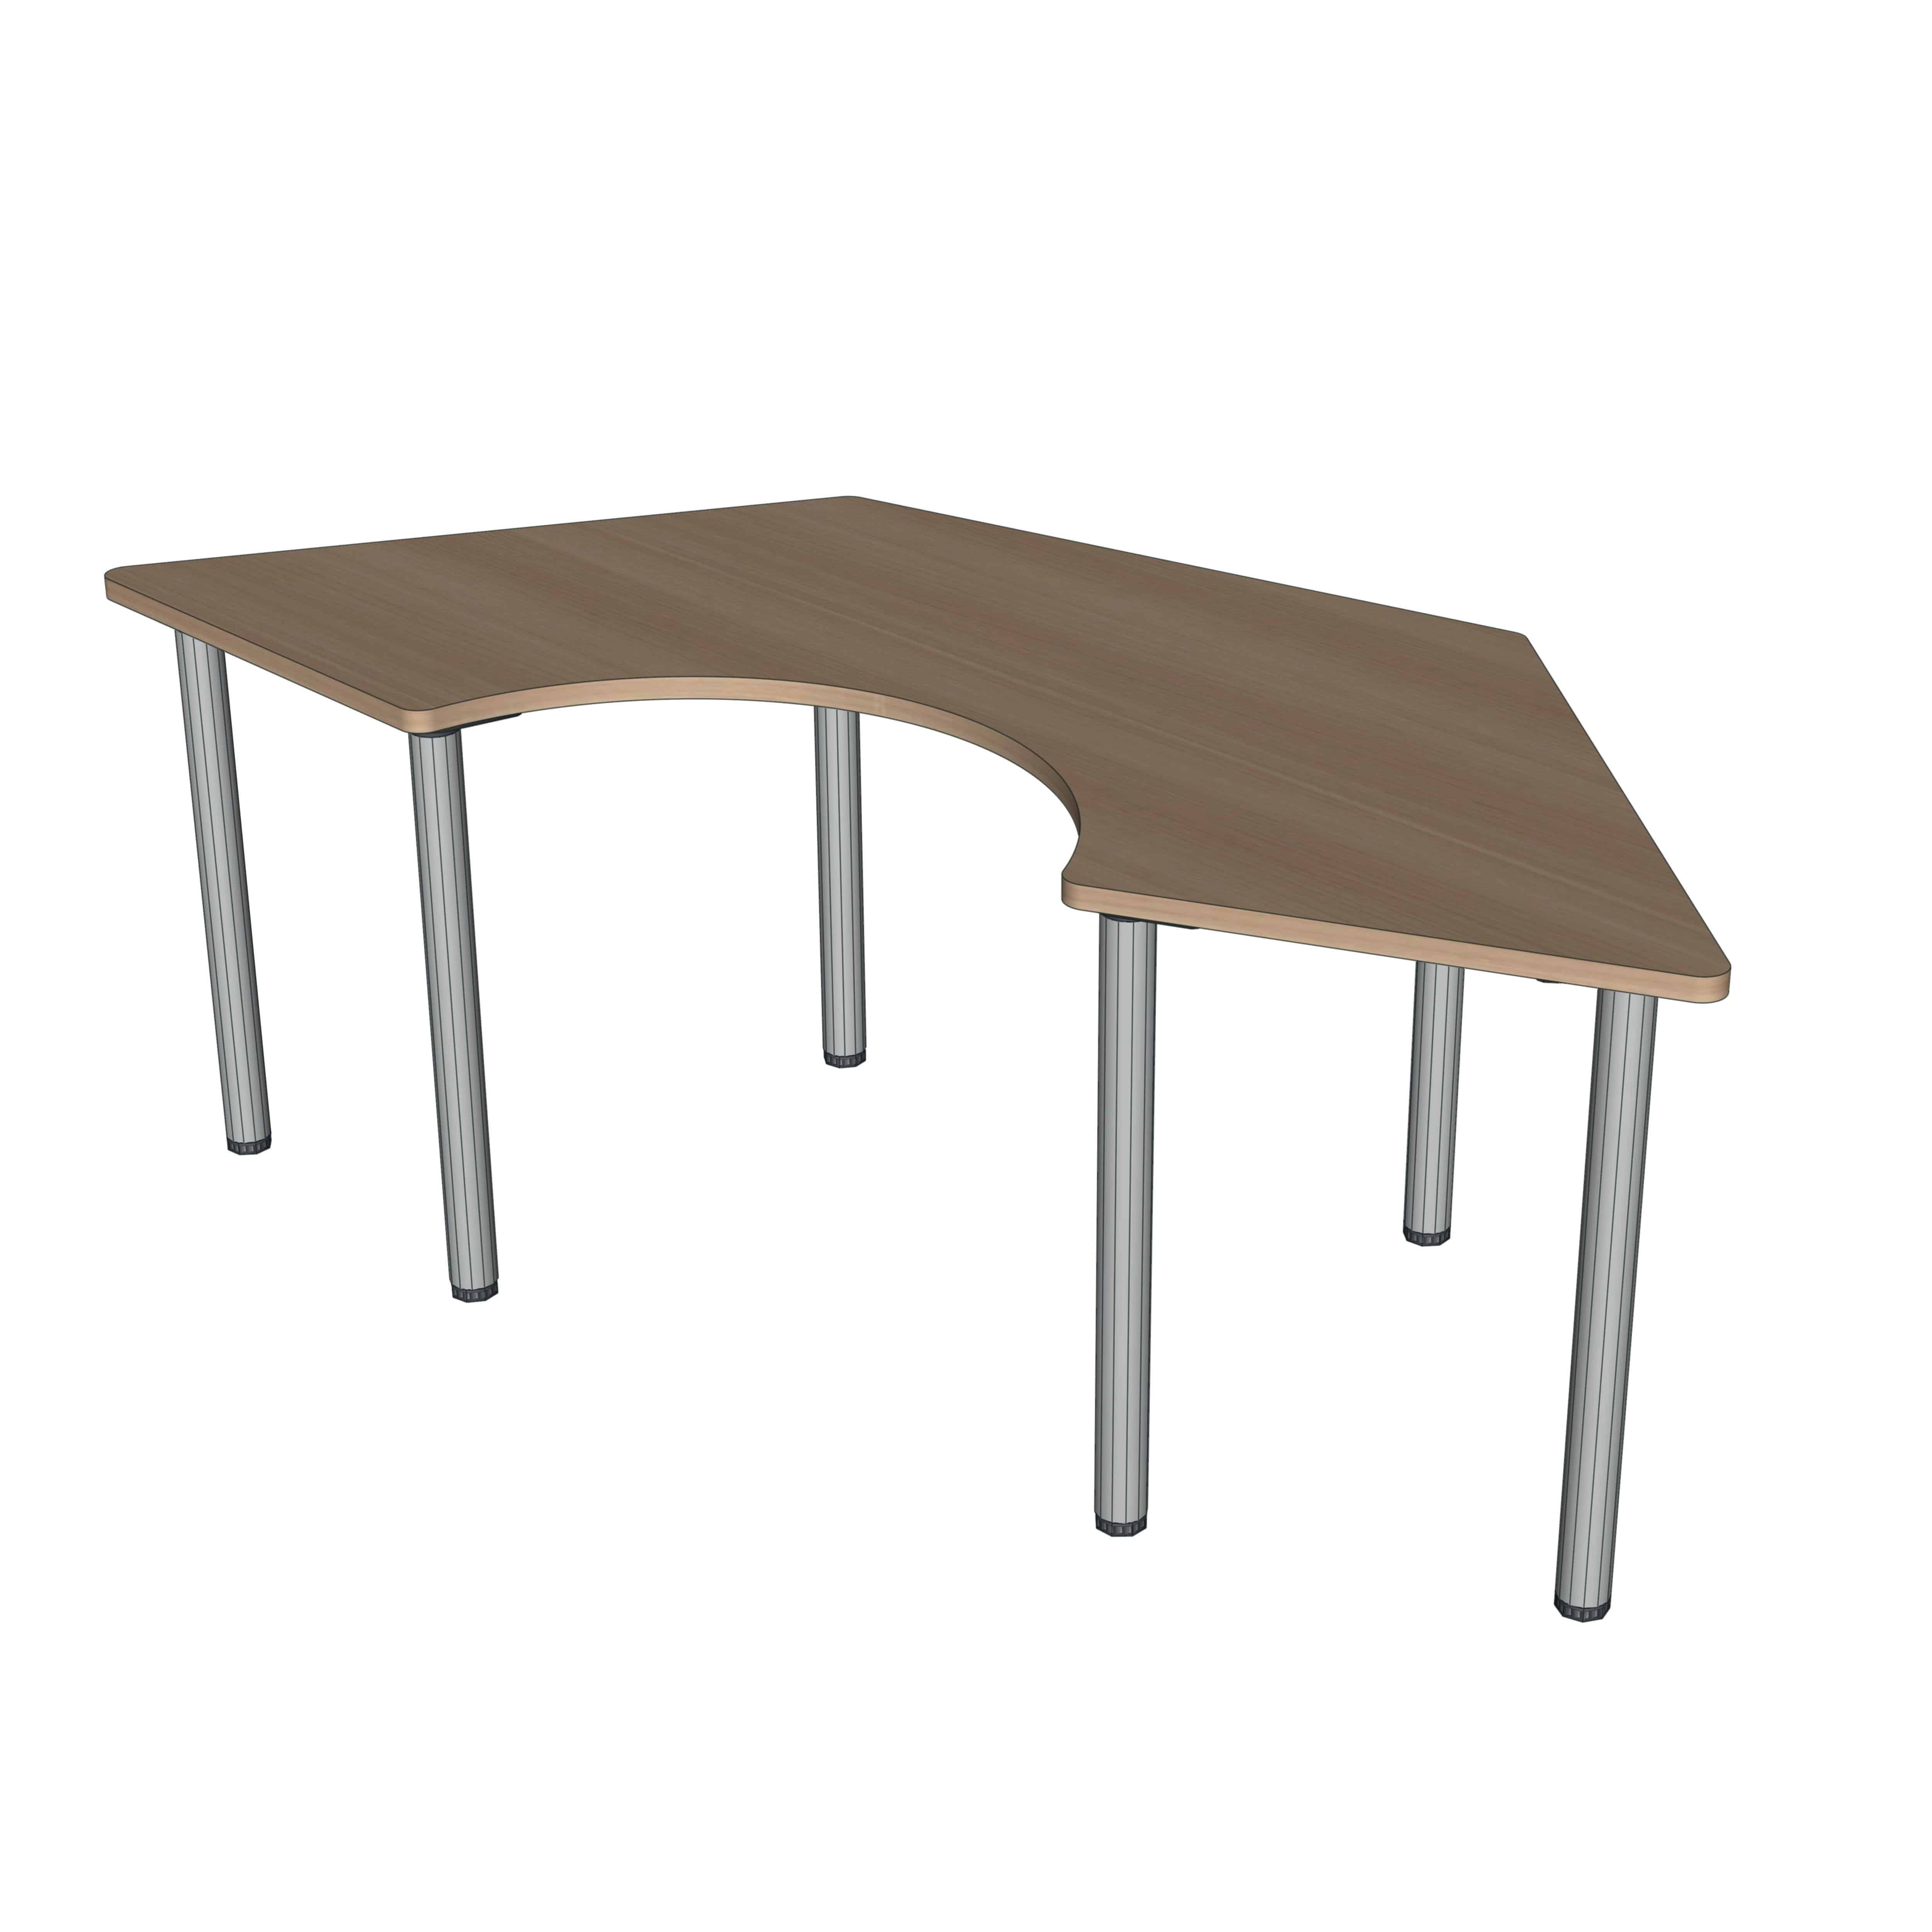 774910 - SHAPED TABLE WITH ABS EDGE (4 LEGS)